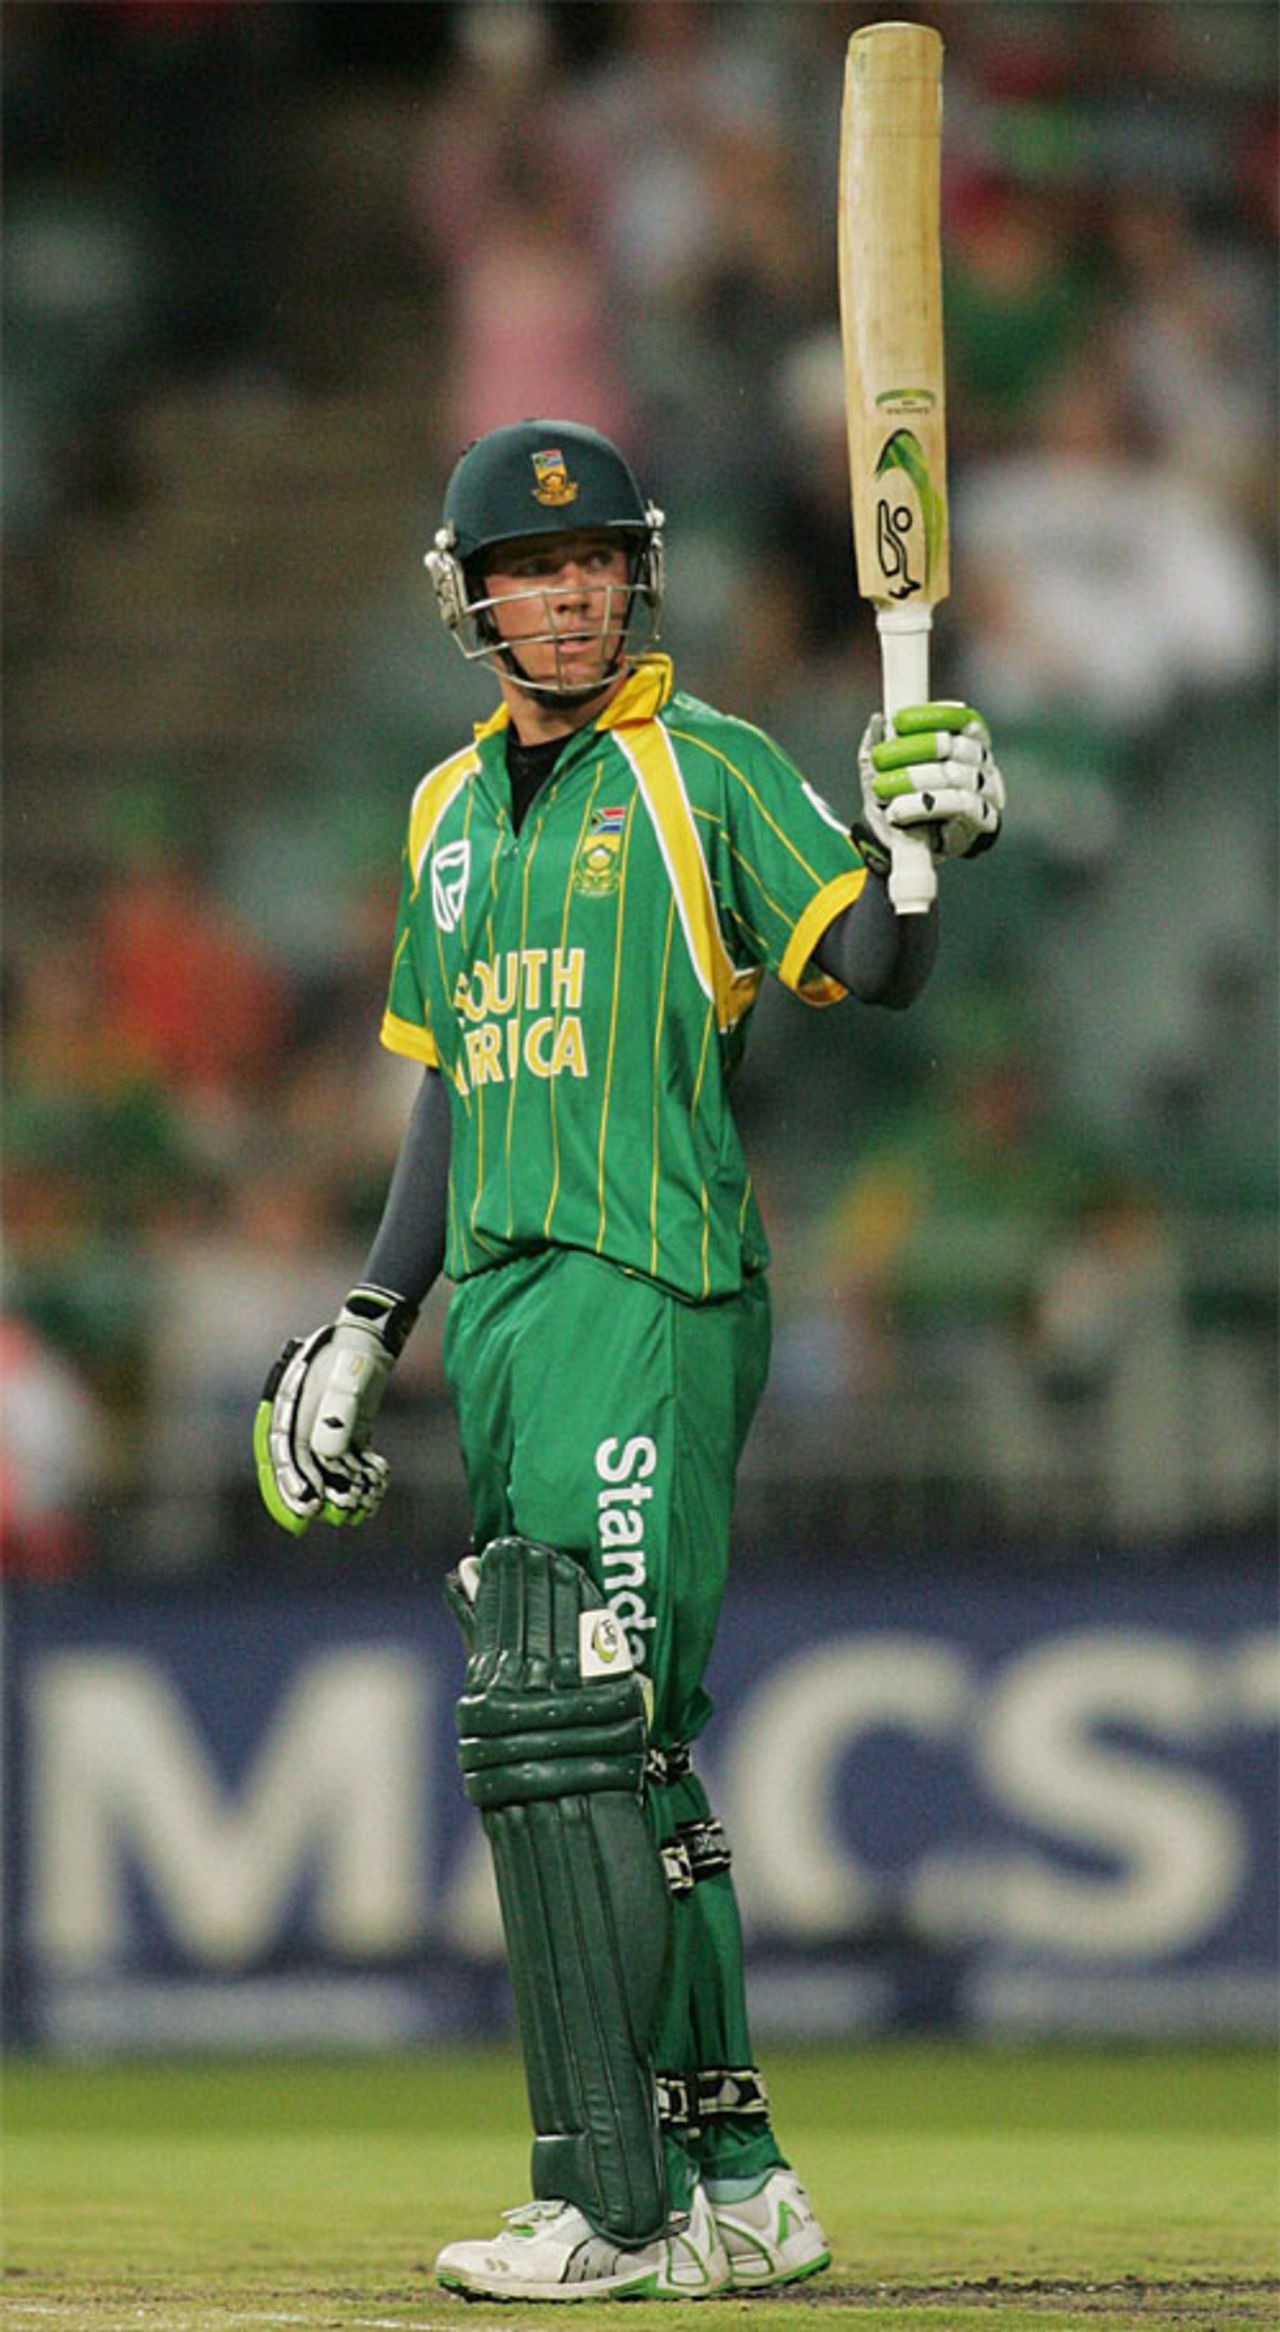 AB de Villiers takes the credit for his fifty, South Africa v New Zealand, Twenty20 International, Johannesburg, November 23, 2007